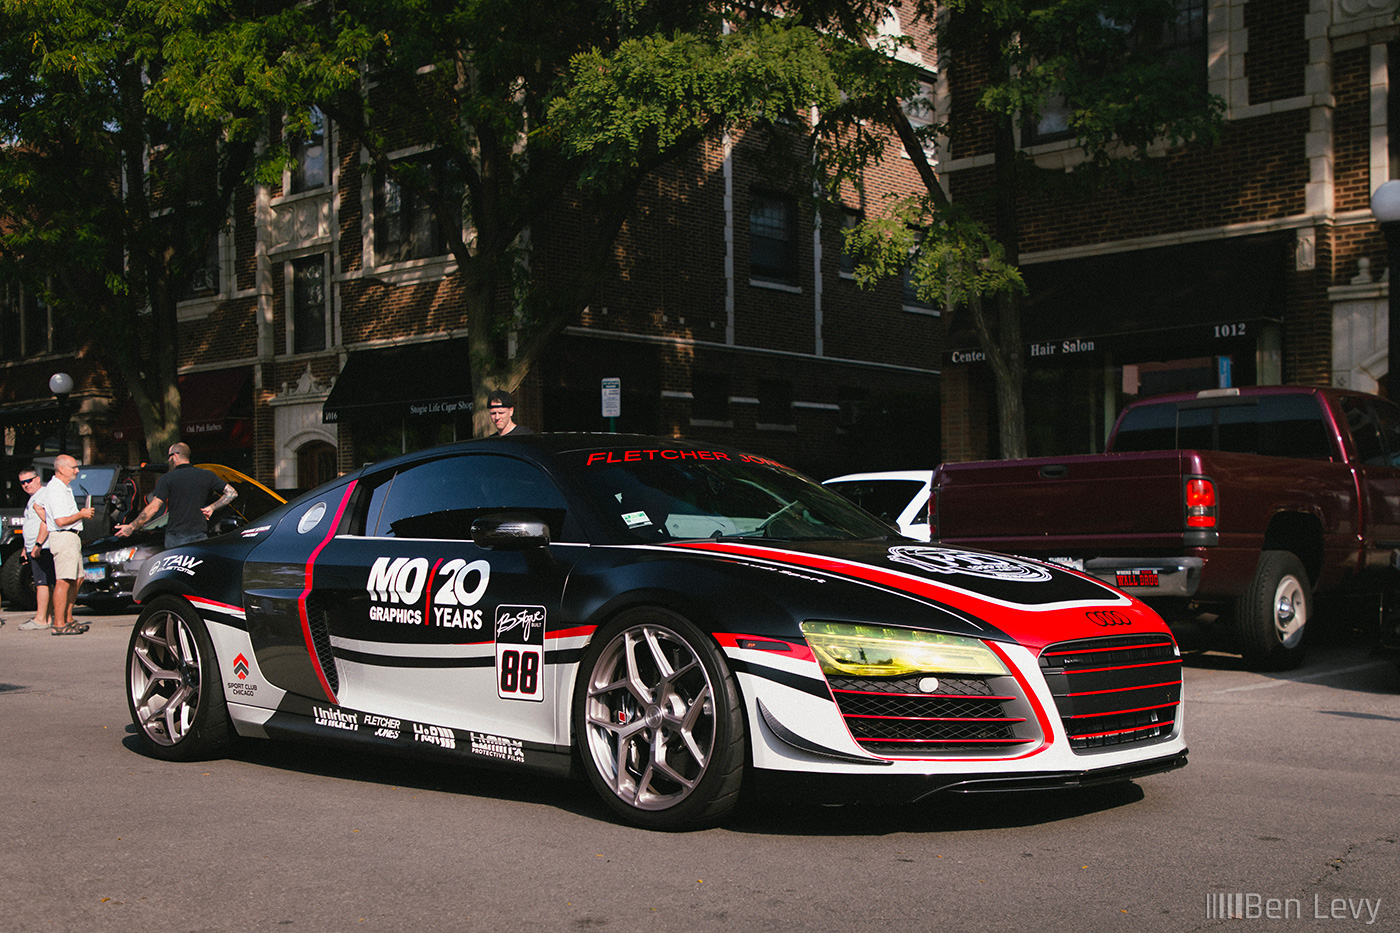 Boosted Audi R8 with Black and Red Livery